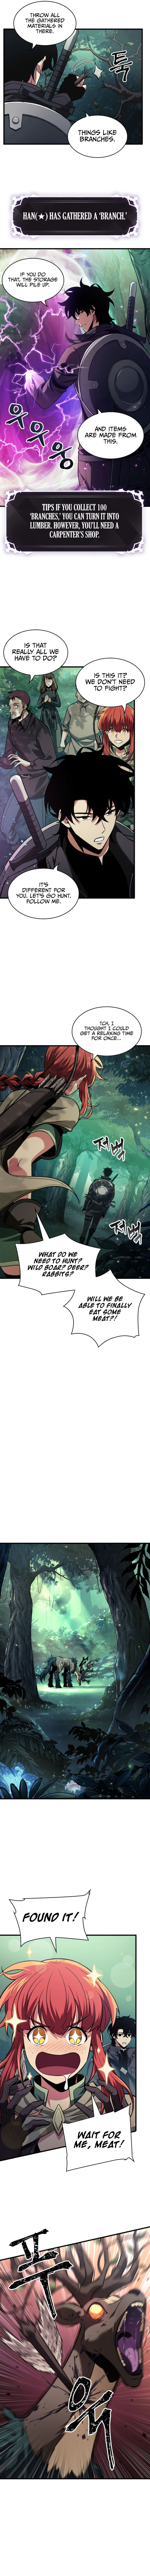 Pick Me Up Chapter 13 page 8